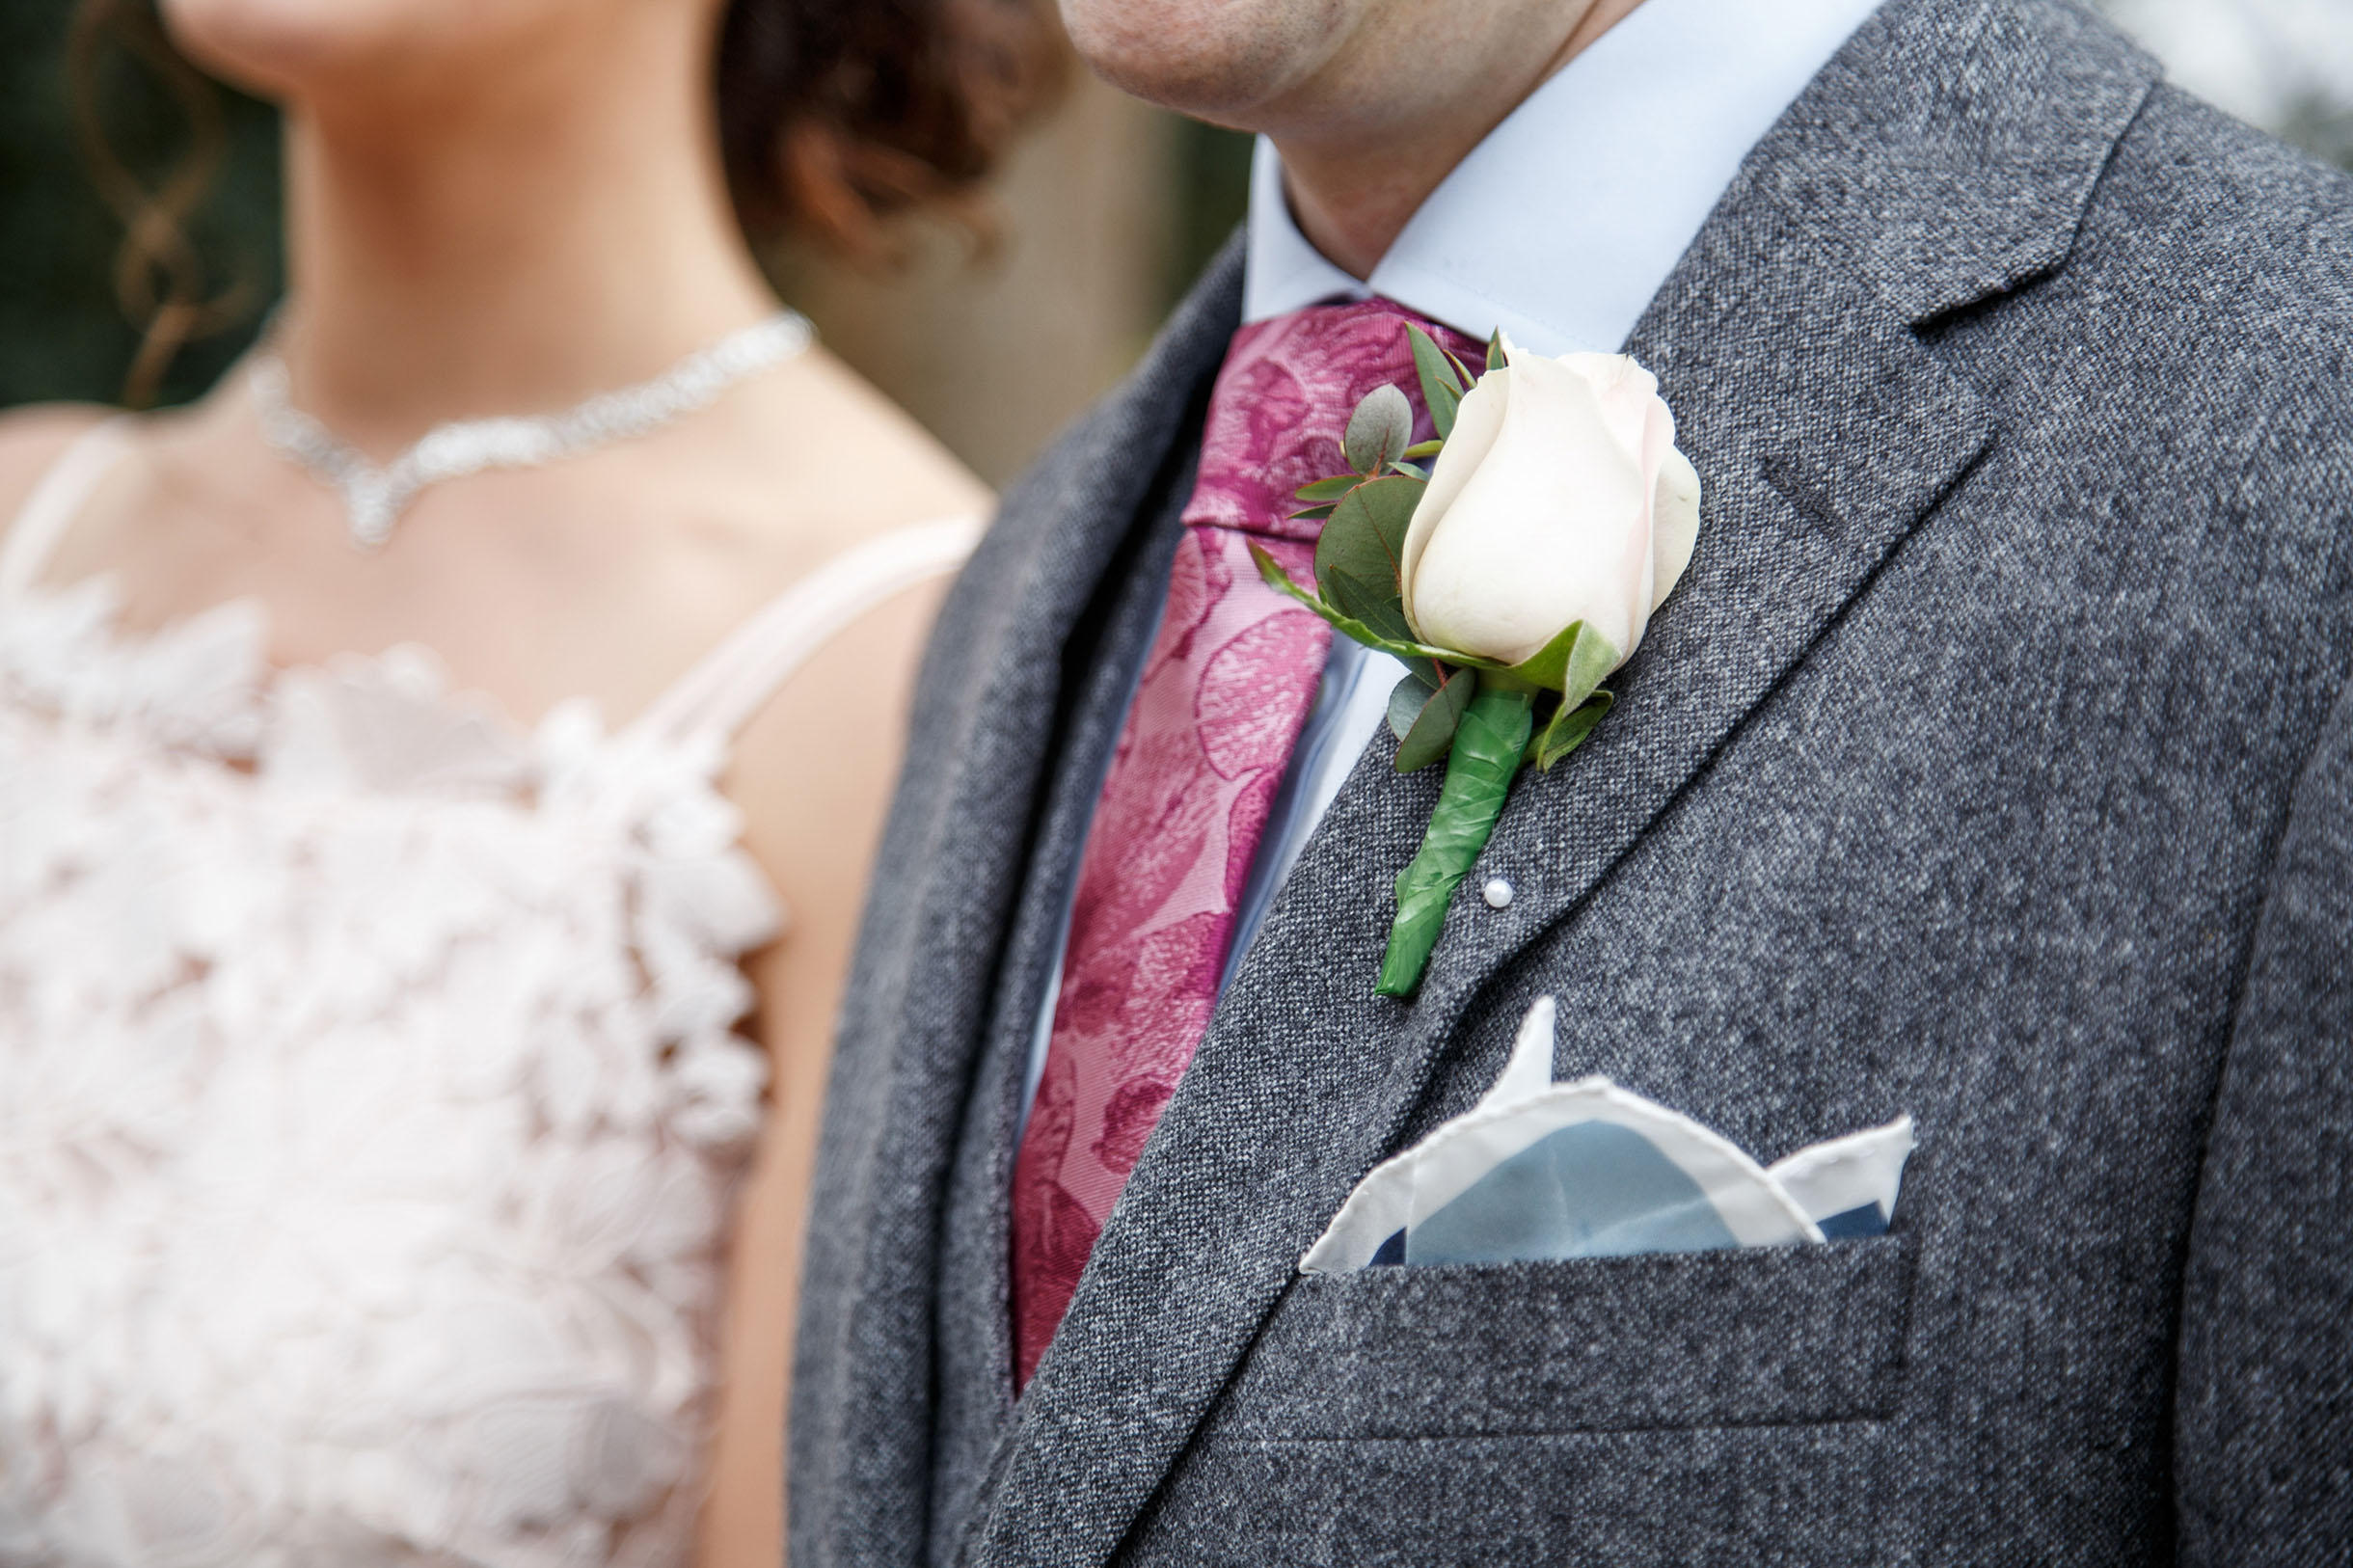 Close up shot of a couple, focusing on groom's chest with a flower attached to his jacket.